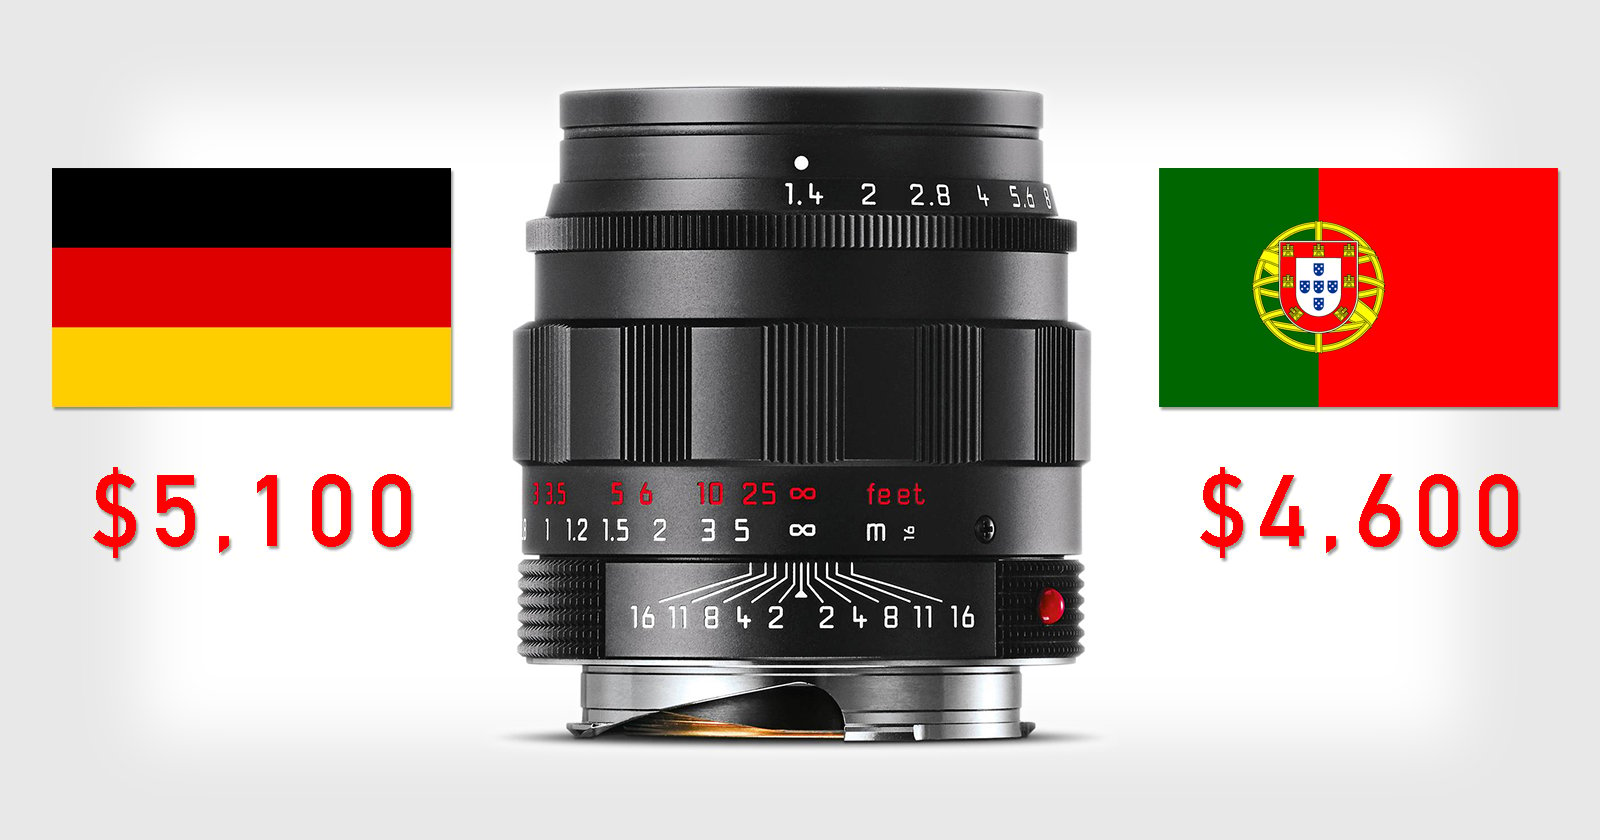 Leica Unveils Line of Made in Portugal Lenses that are Cheaper for US Buyers